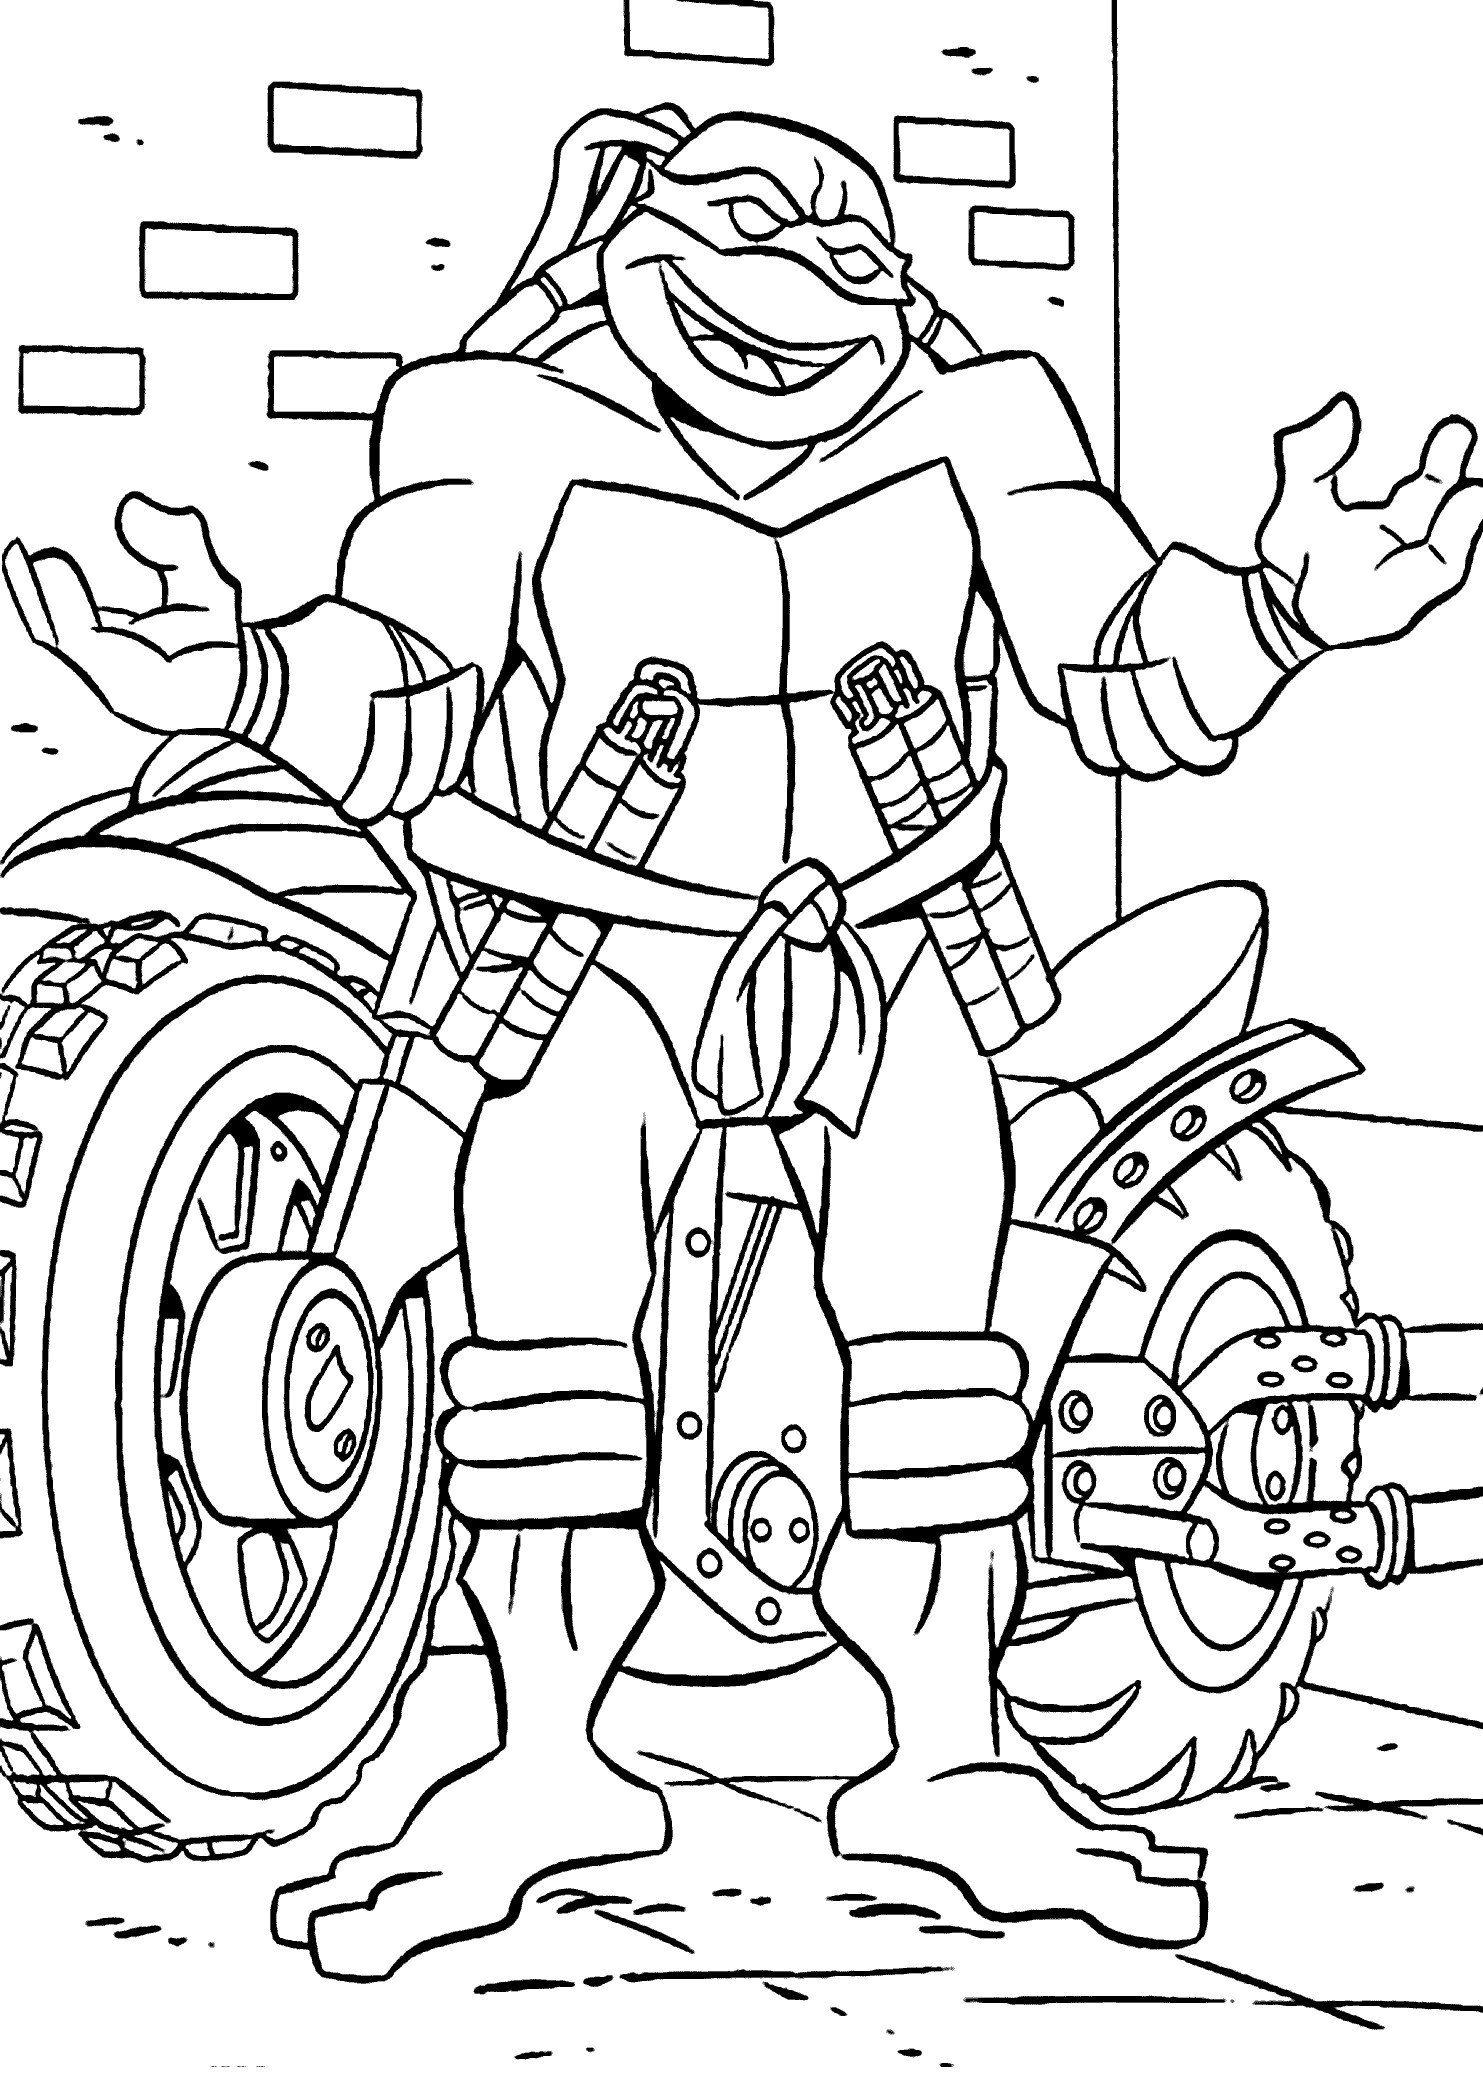 Free Coloring Pages For Boys Turtle
 Teenage Mutant Ninja Turtles Free Coloring Page Printable